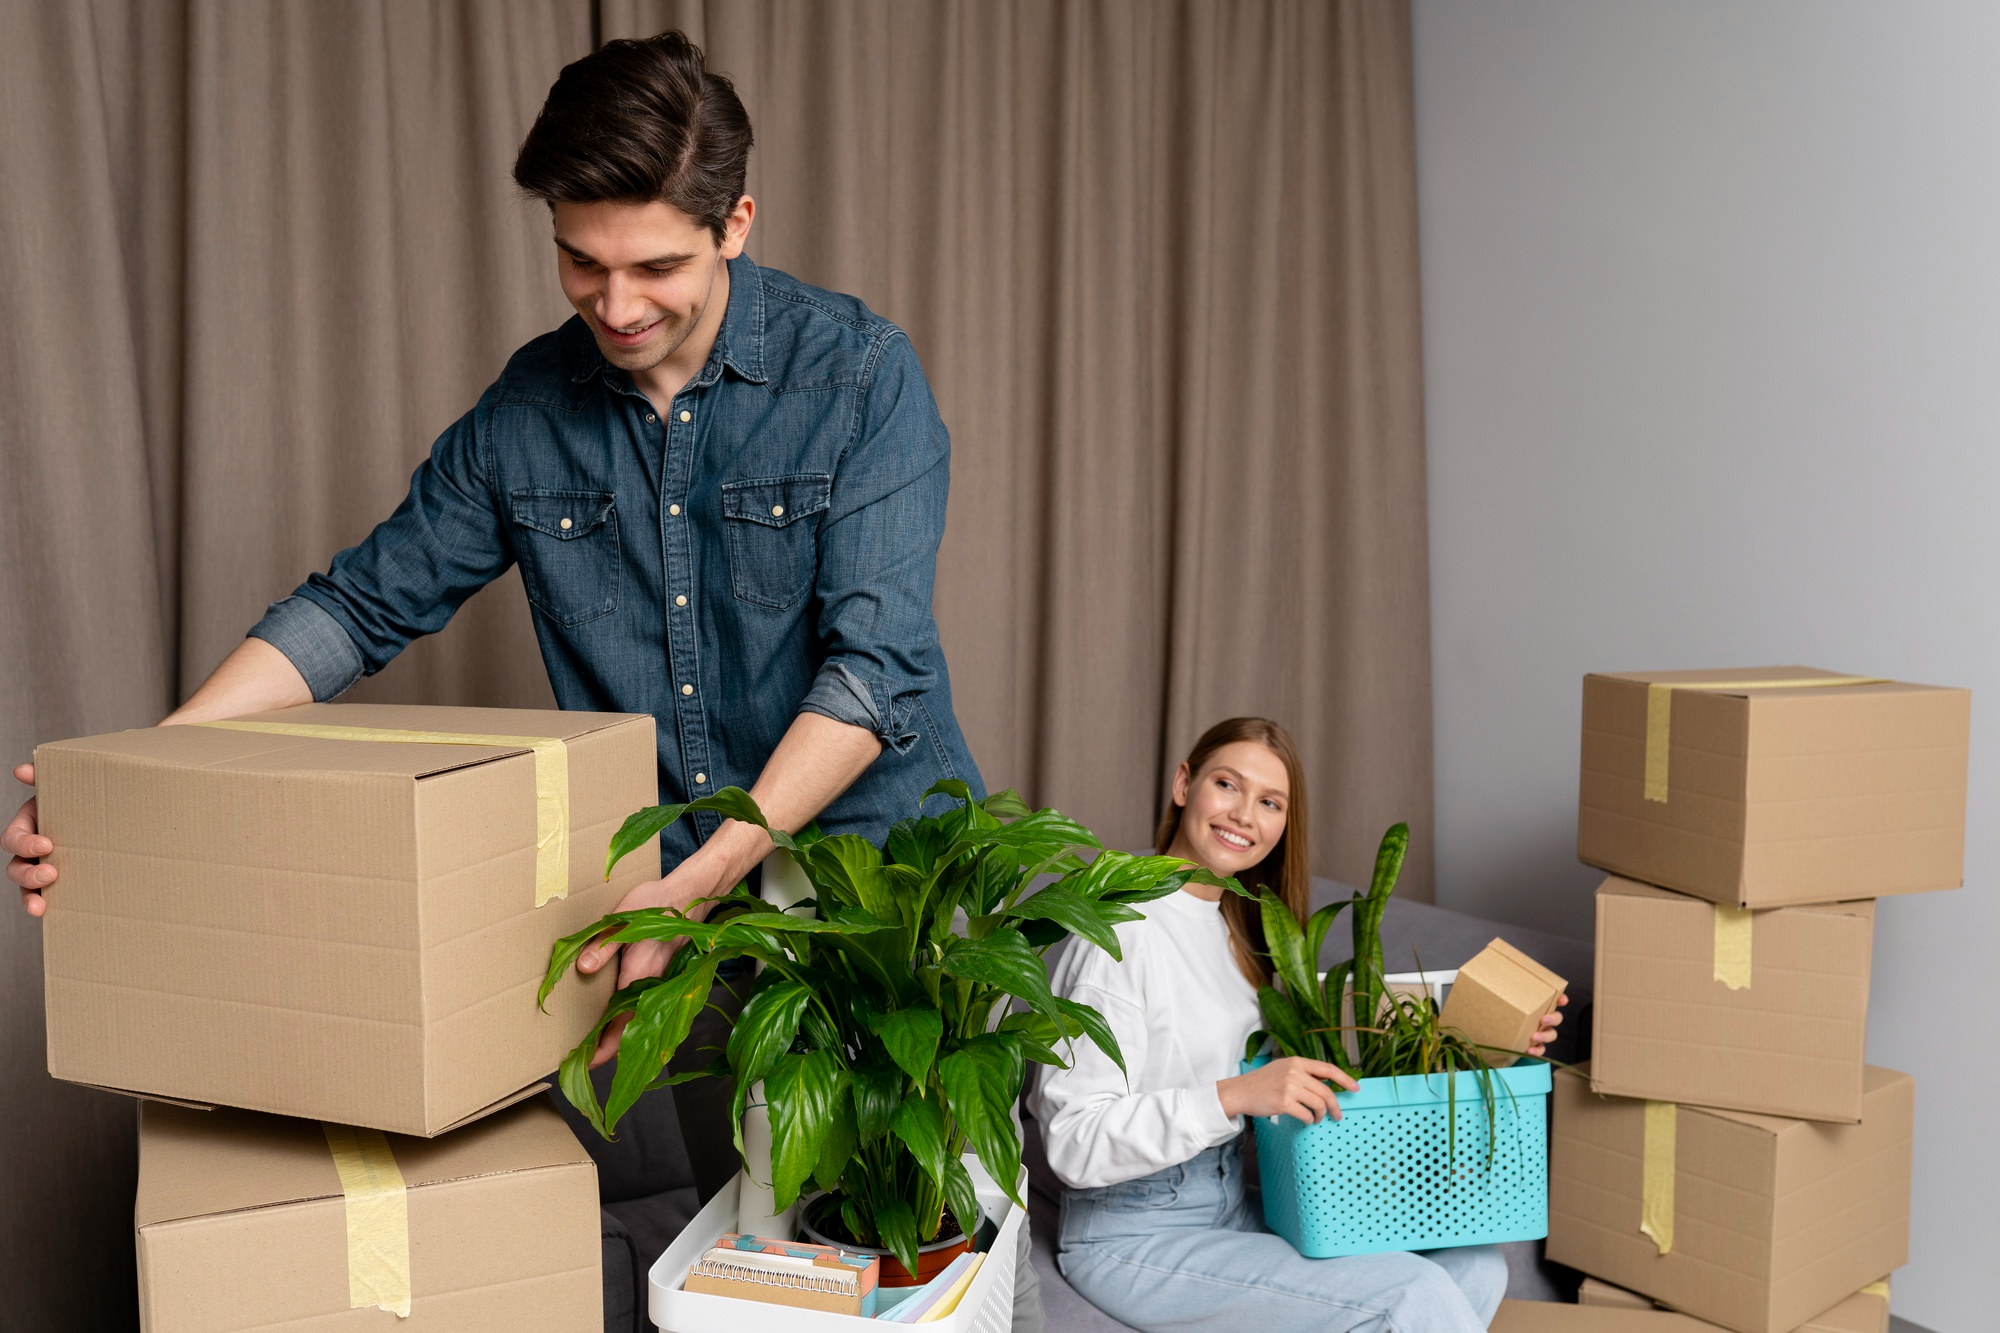 couple-handling-boxes-belongings-after-moving-new-house